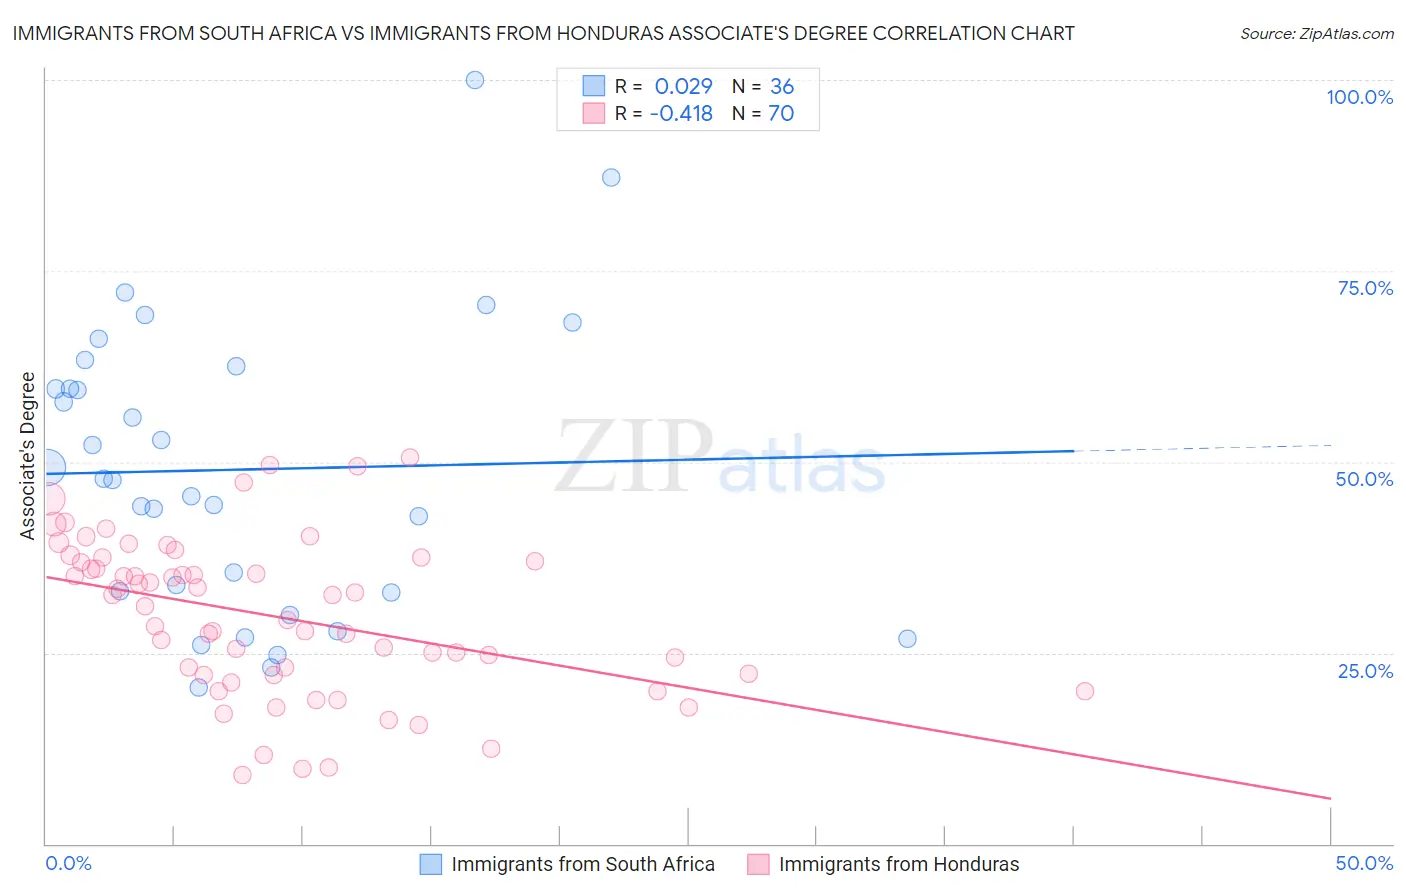 Immigrants from South Africa vs Immigrants from Honduras Associate's Degree